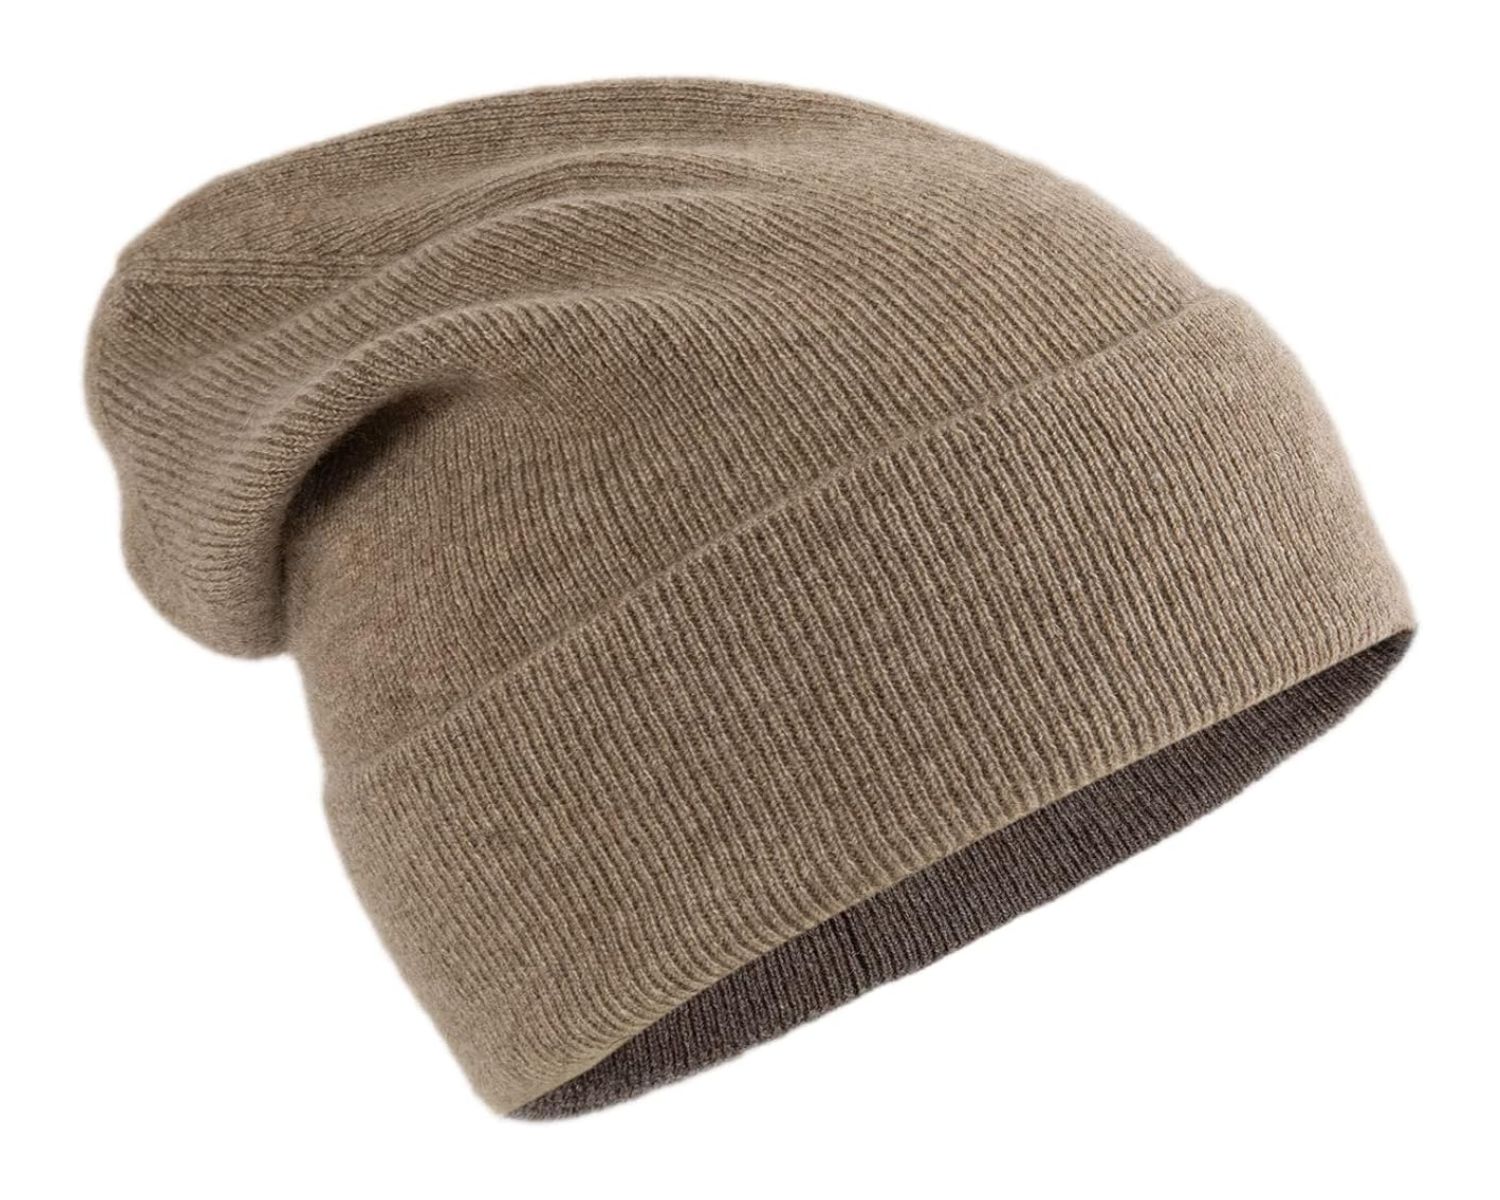 Cashmere Beanie Review: Luxurious and Warm Headwear